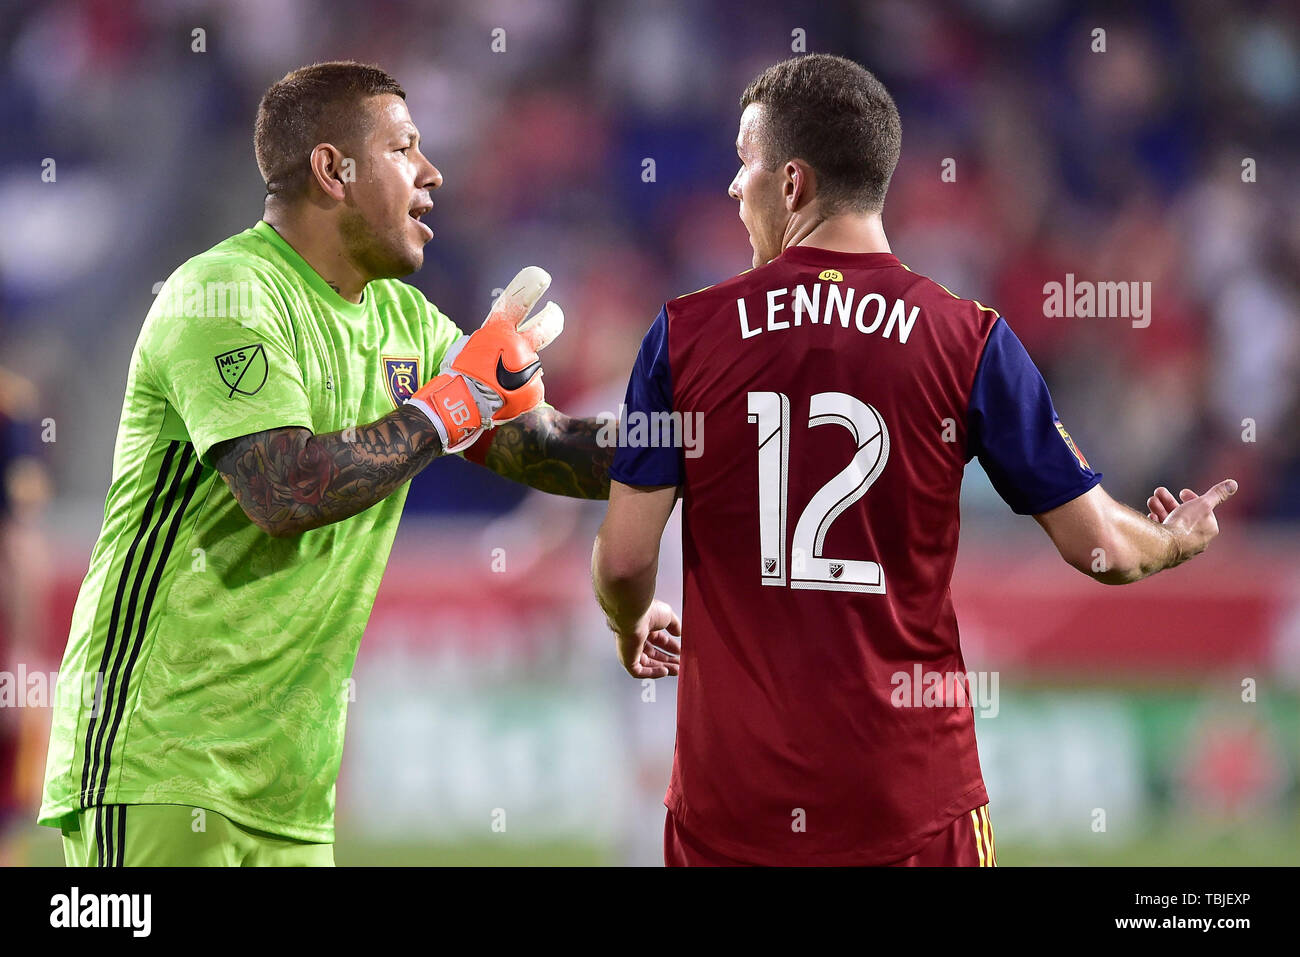 Harrison, New Jersey, USA. 1st June, 2019. Real Salt Lake goalkeeper NICK RIMANDO (18) and Real Salt Lake midfielder BROOKS LENON (12) are seen after conceding a fourth goal at Red Bull Arena in Harrison New Jersey New York defeats Real Salt Lake 4 to 0 Credit: Brooks Von Arx/ZUMA Wire/Alamy Live News Stock Photo